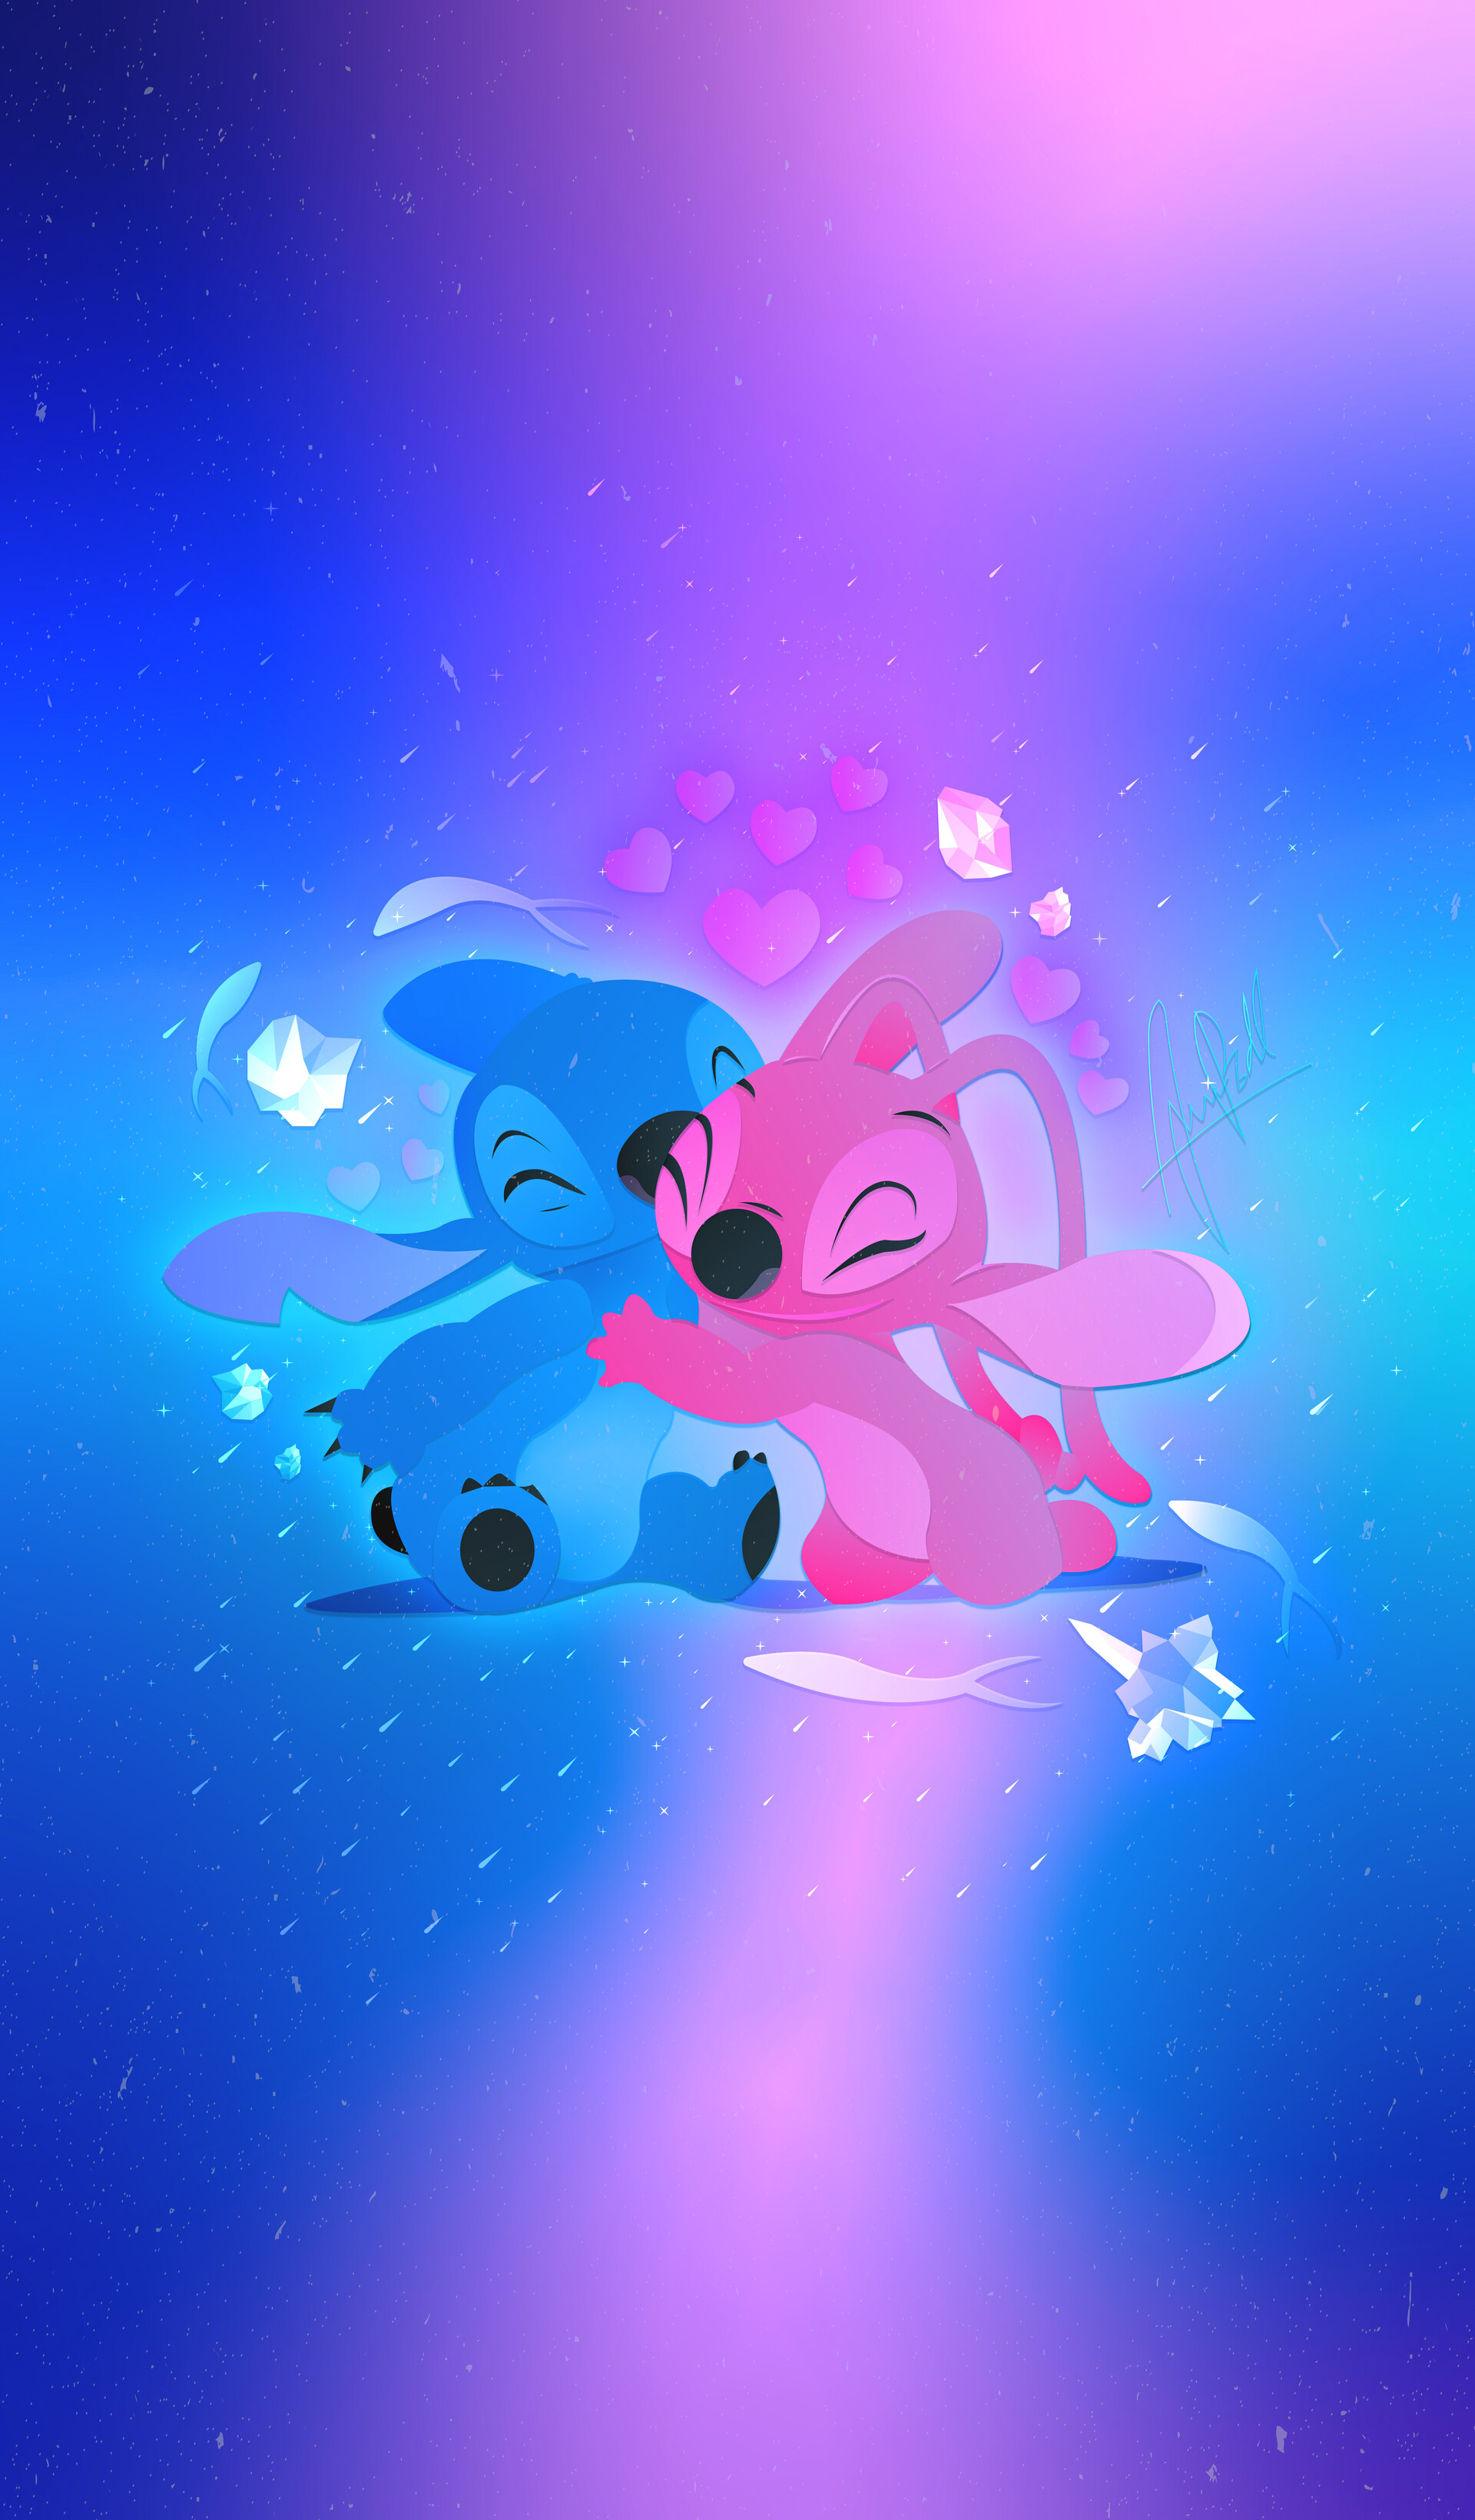 Share 74+ stitch and angel wallpaper - in.cdgdbentre